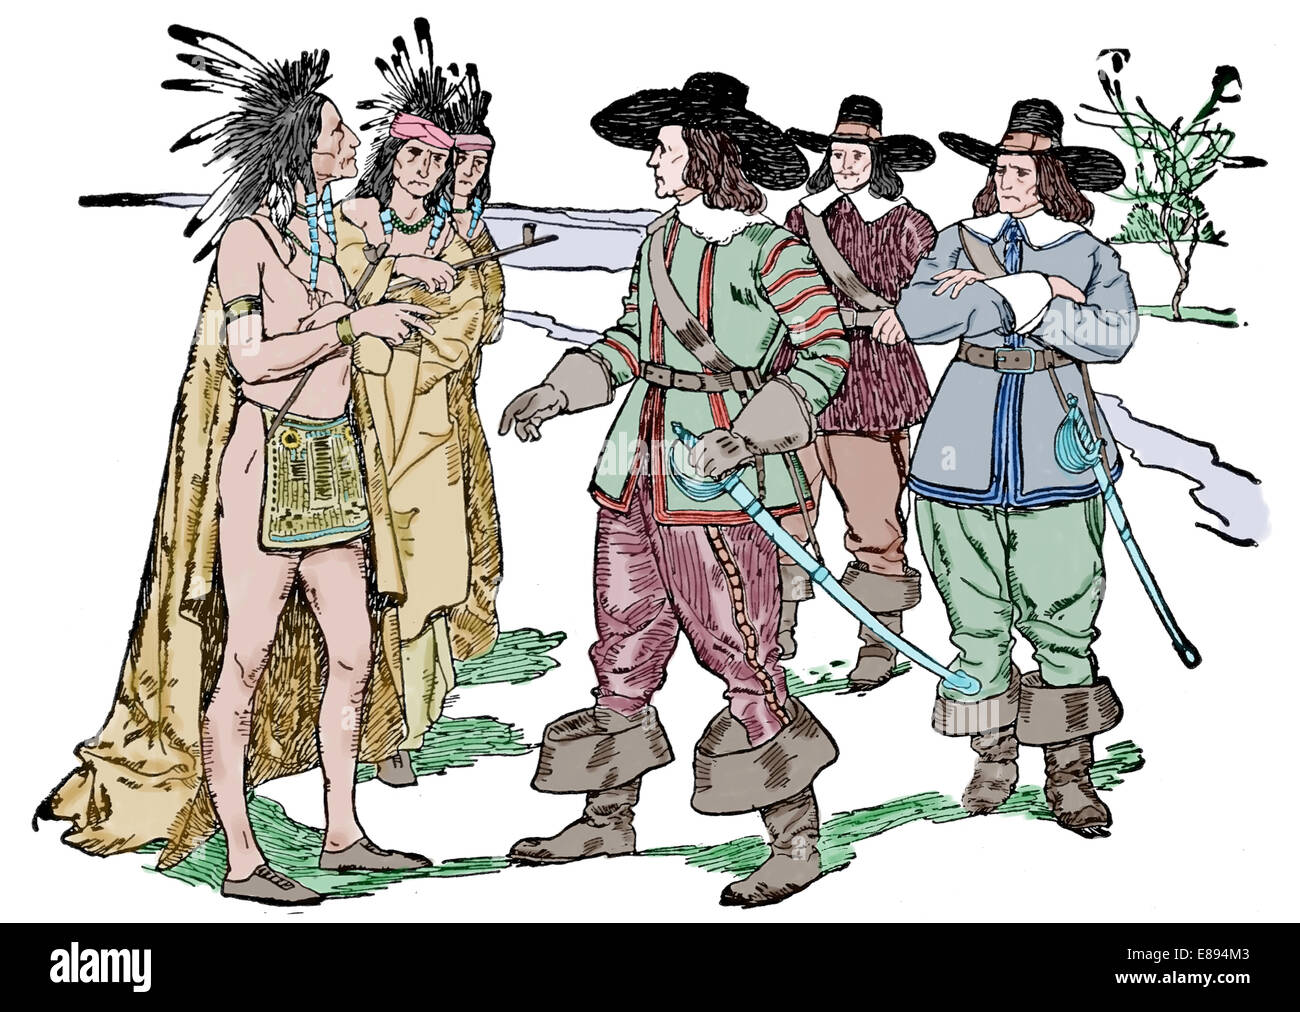 North America. English Explorers bartering for land. Engraving by A History of the United States for Schools. Later colouration. Stock Photo